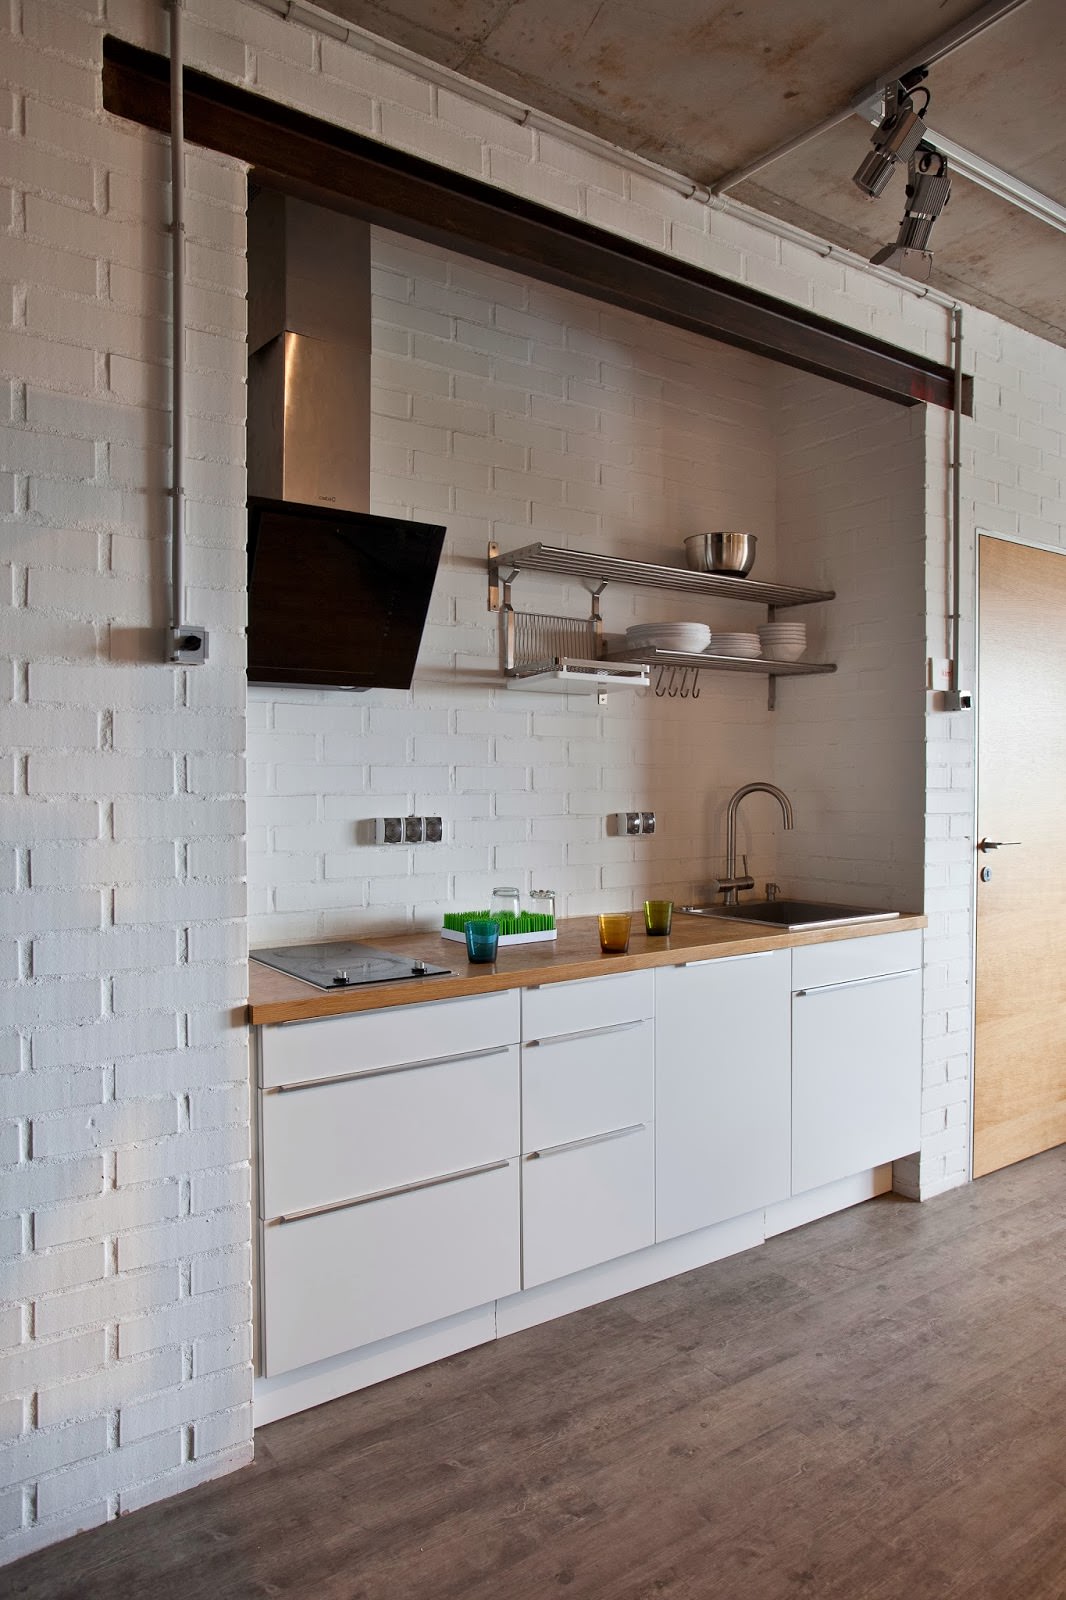 kitchen with white brick walls in the interior of a creative apartment